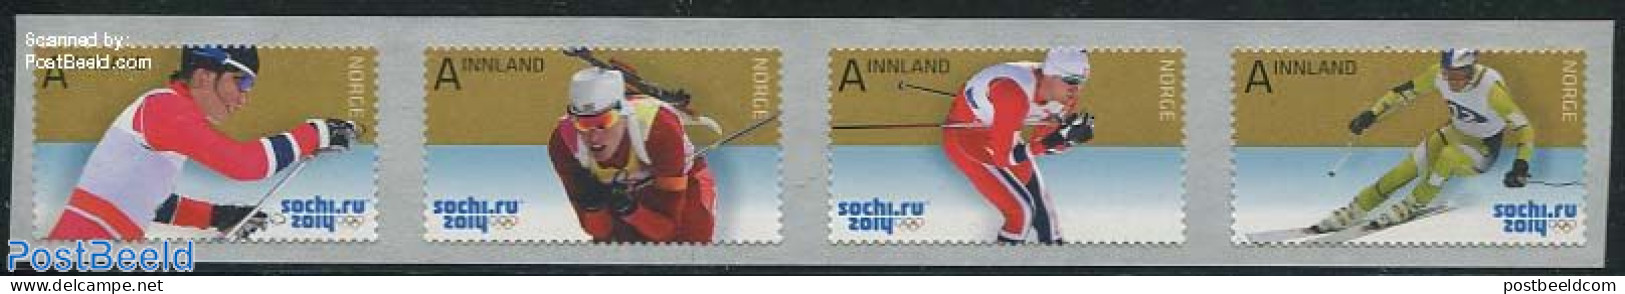 Norway 2014 Olympic Winter Games Sochi 4v S-a, Mint NH, Sport - Olympic Winter Games - Skiing - Unused Stamps